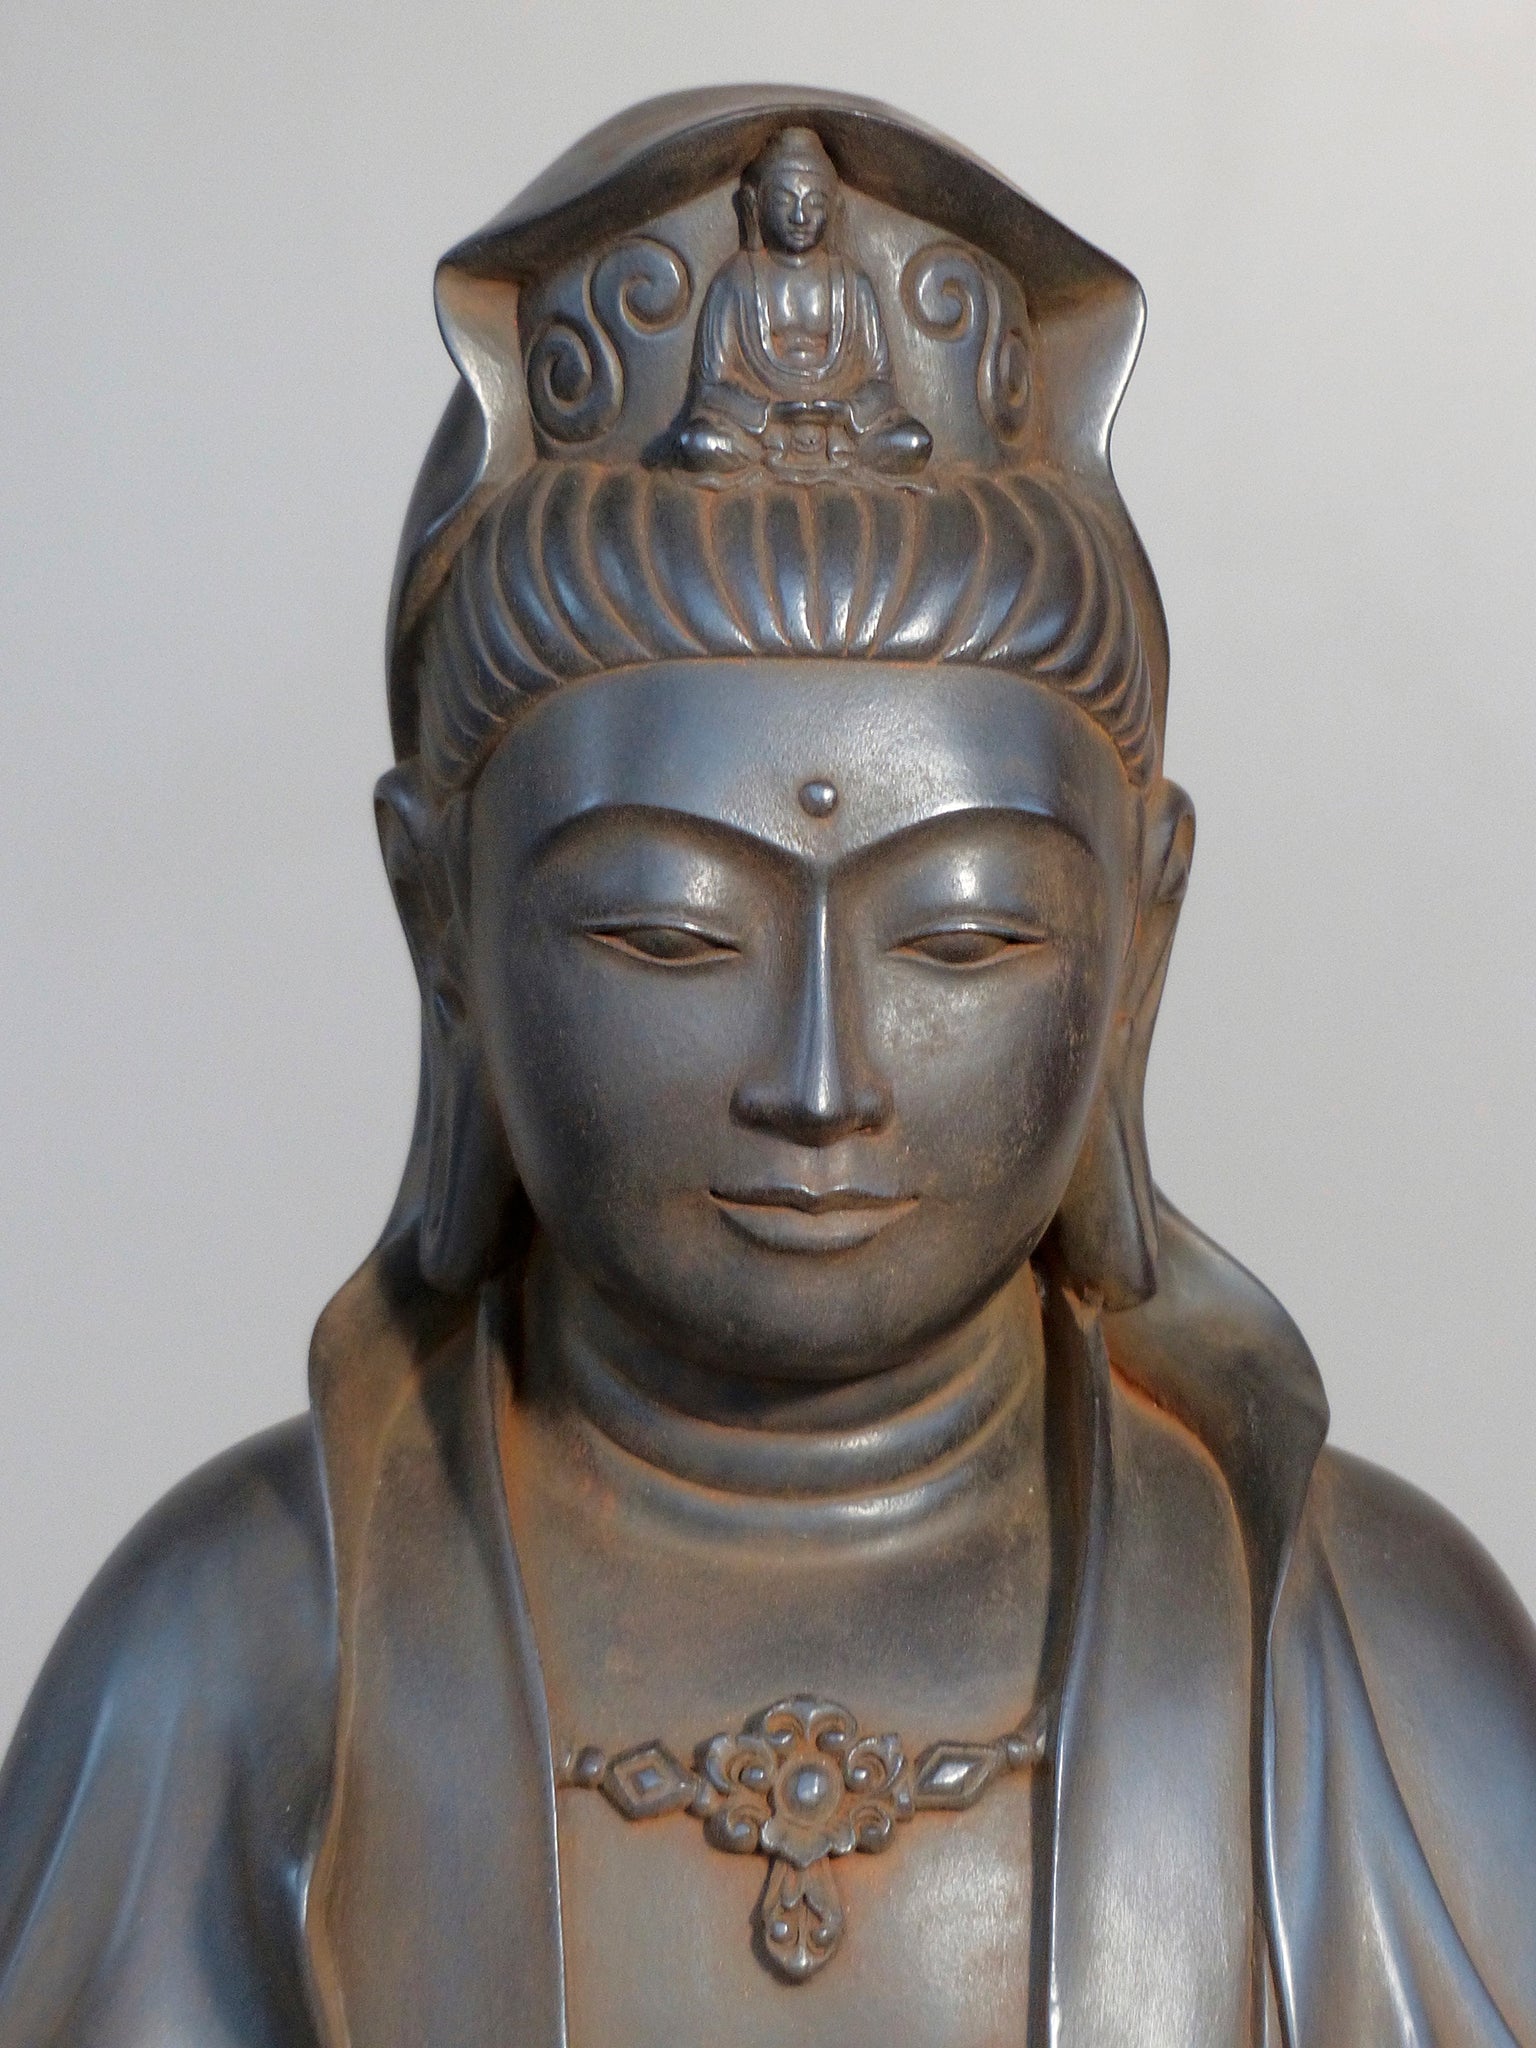 Quan Yin statue seated antique rust 24 inches close up of her beatuiful young serine face